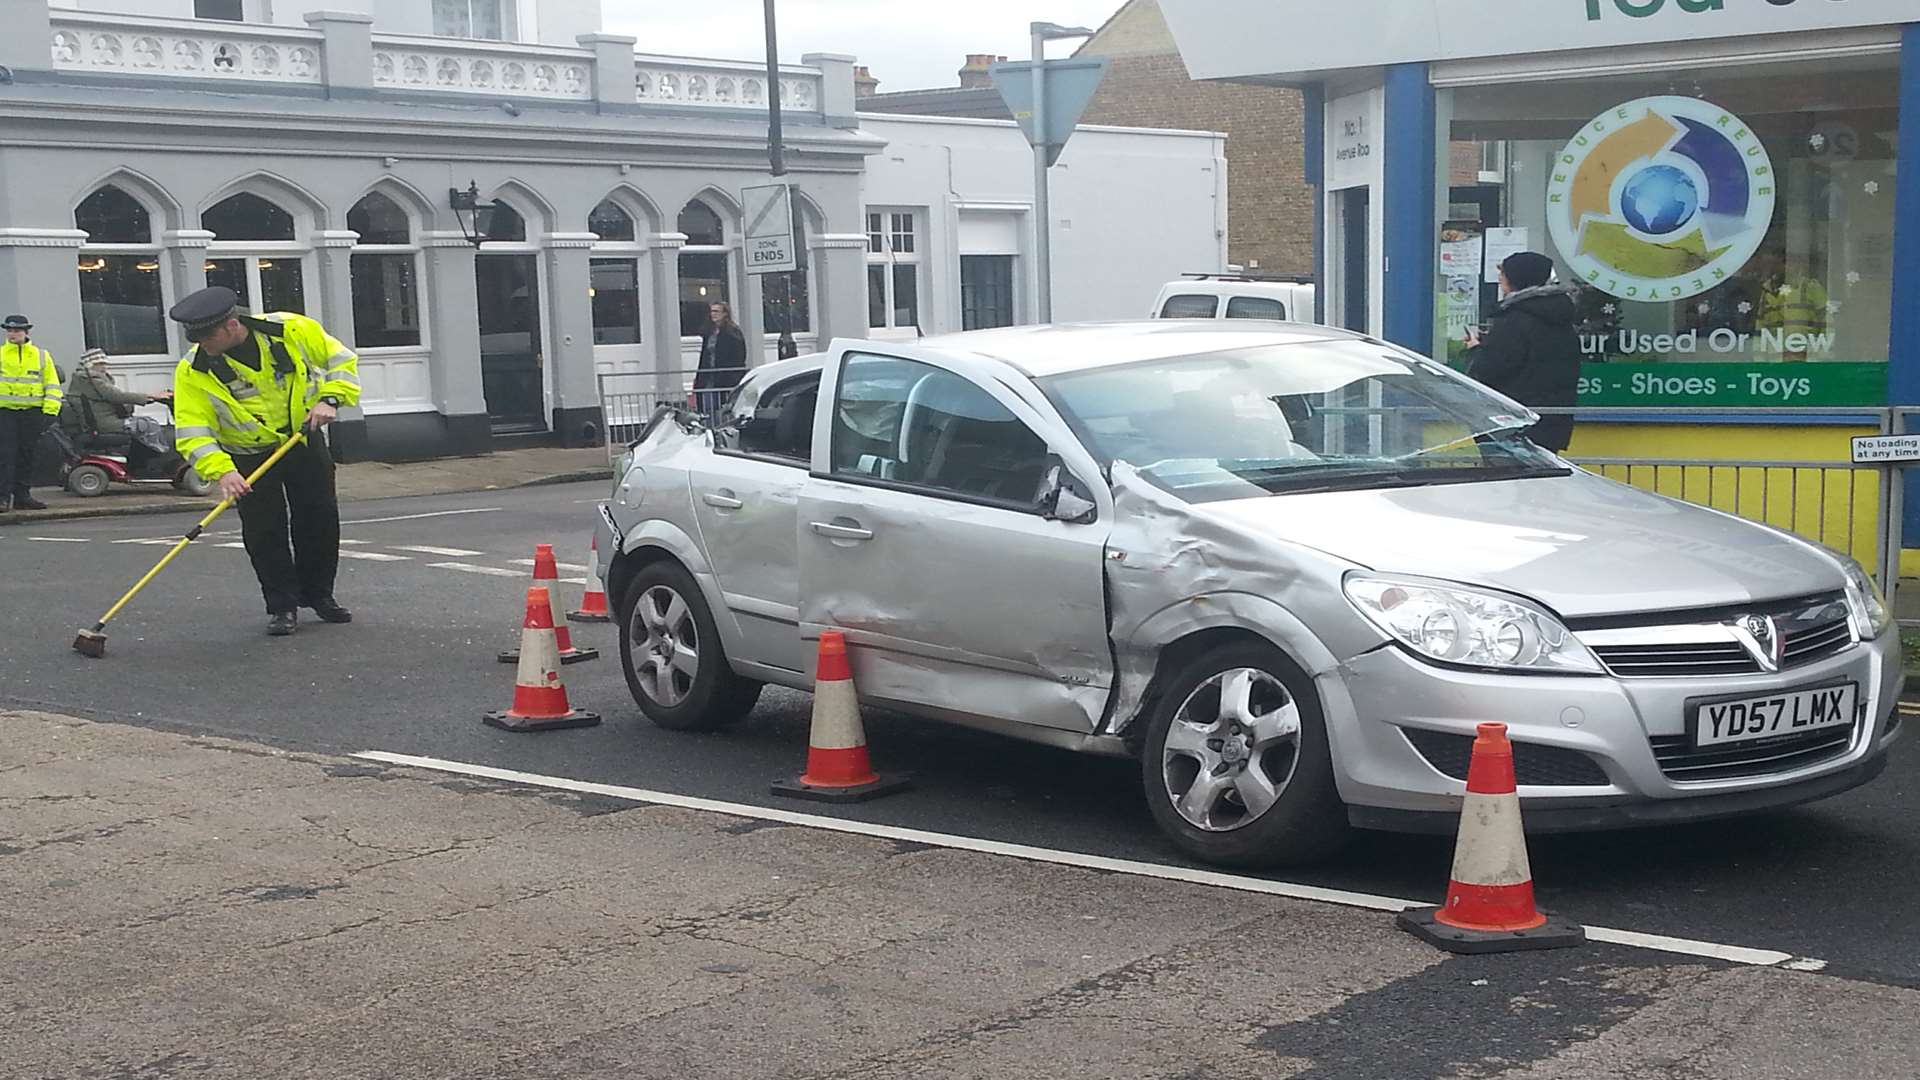 The Vauxhall Astra is thought to have rolled